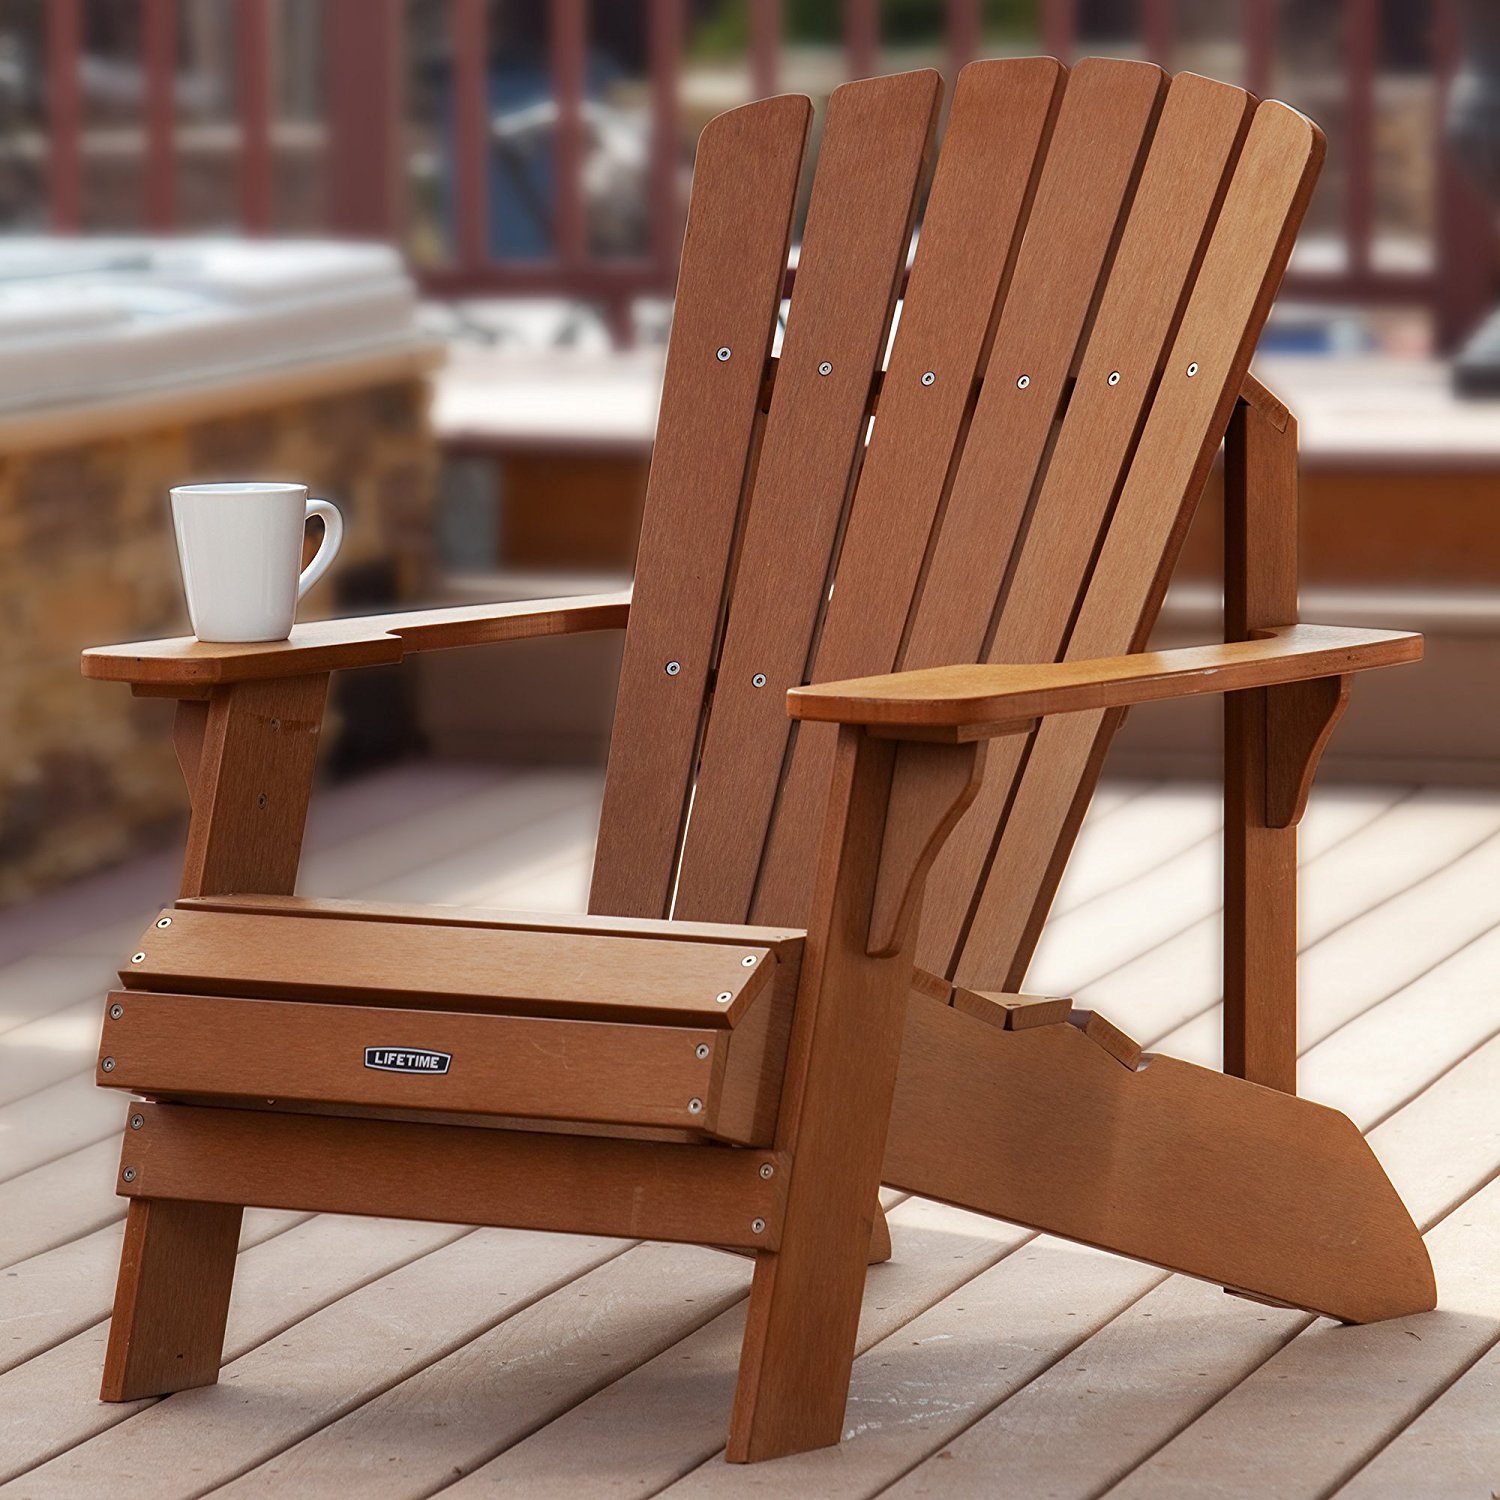 Adirondack chair color meaning